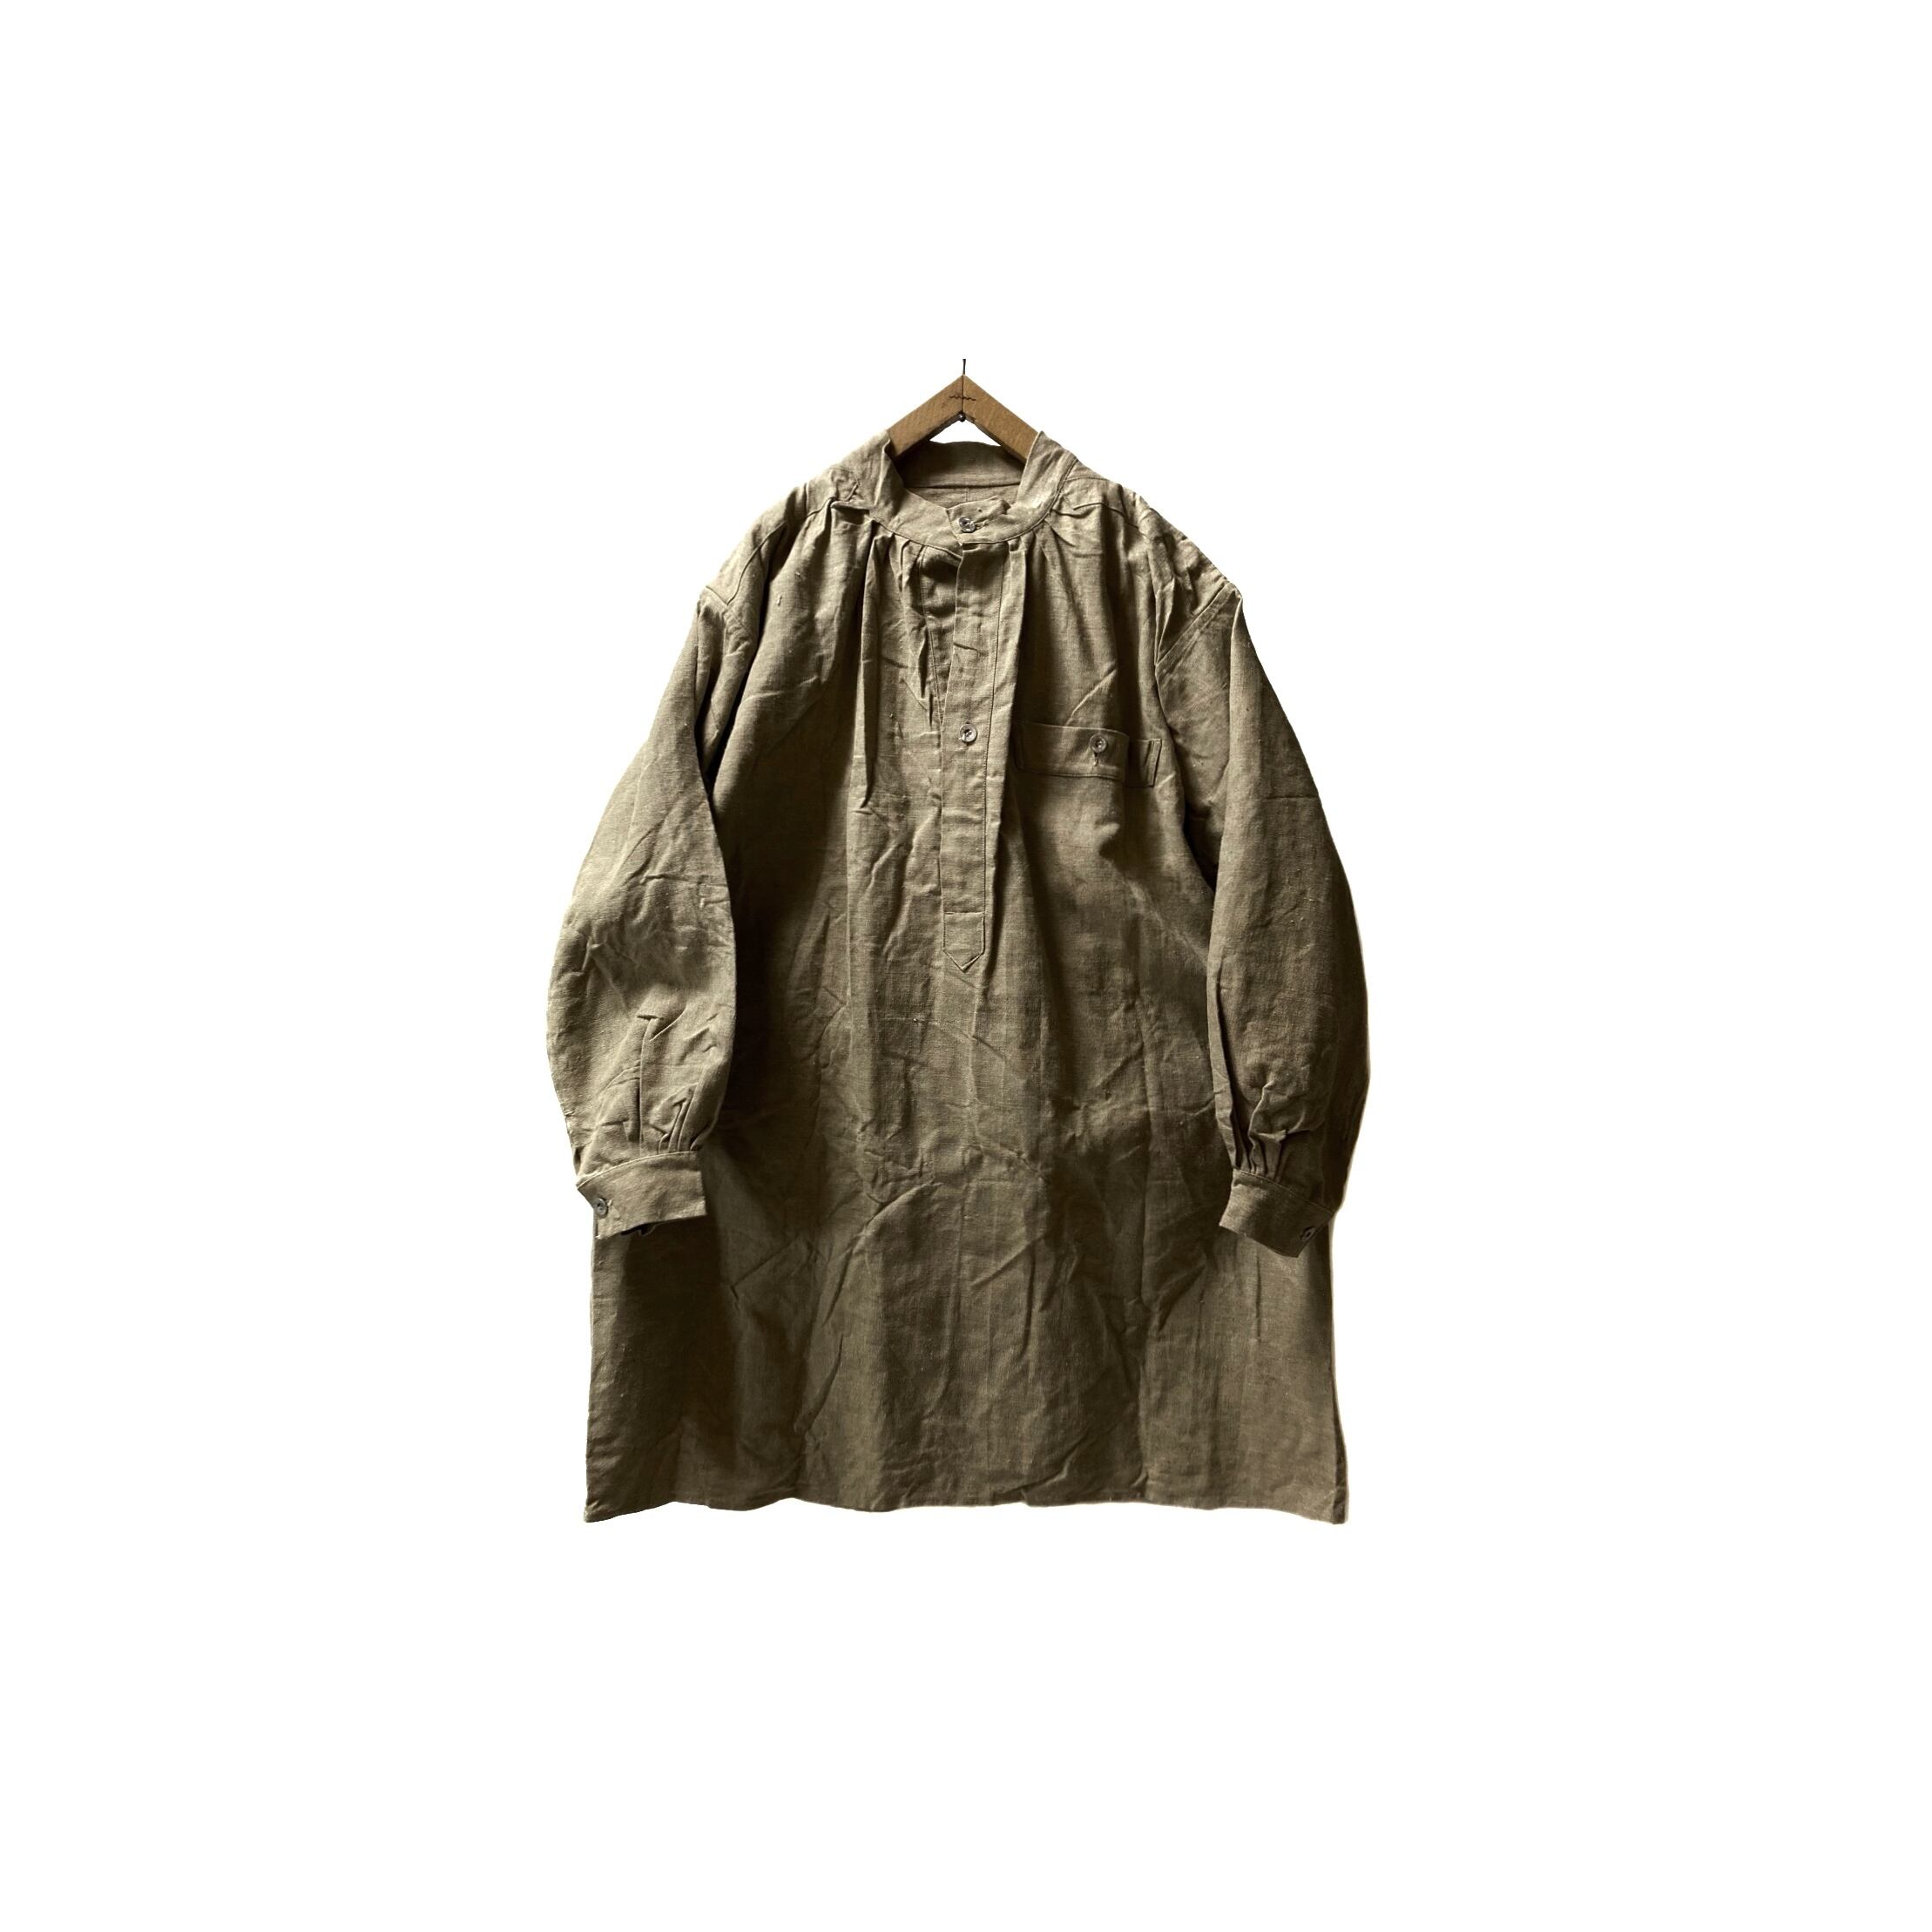 DEADSTOCK] 50's "FRENCH ARMY / HM" HEAVY LINEN BOURGERON SMOCK